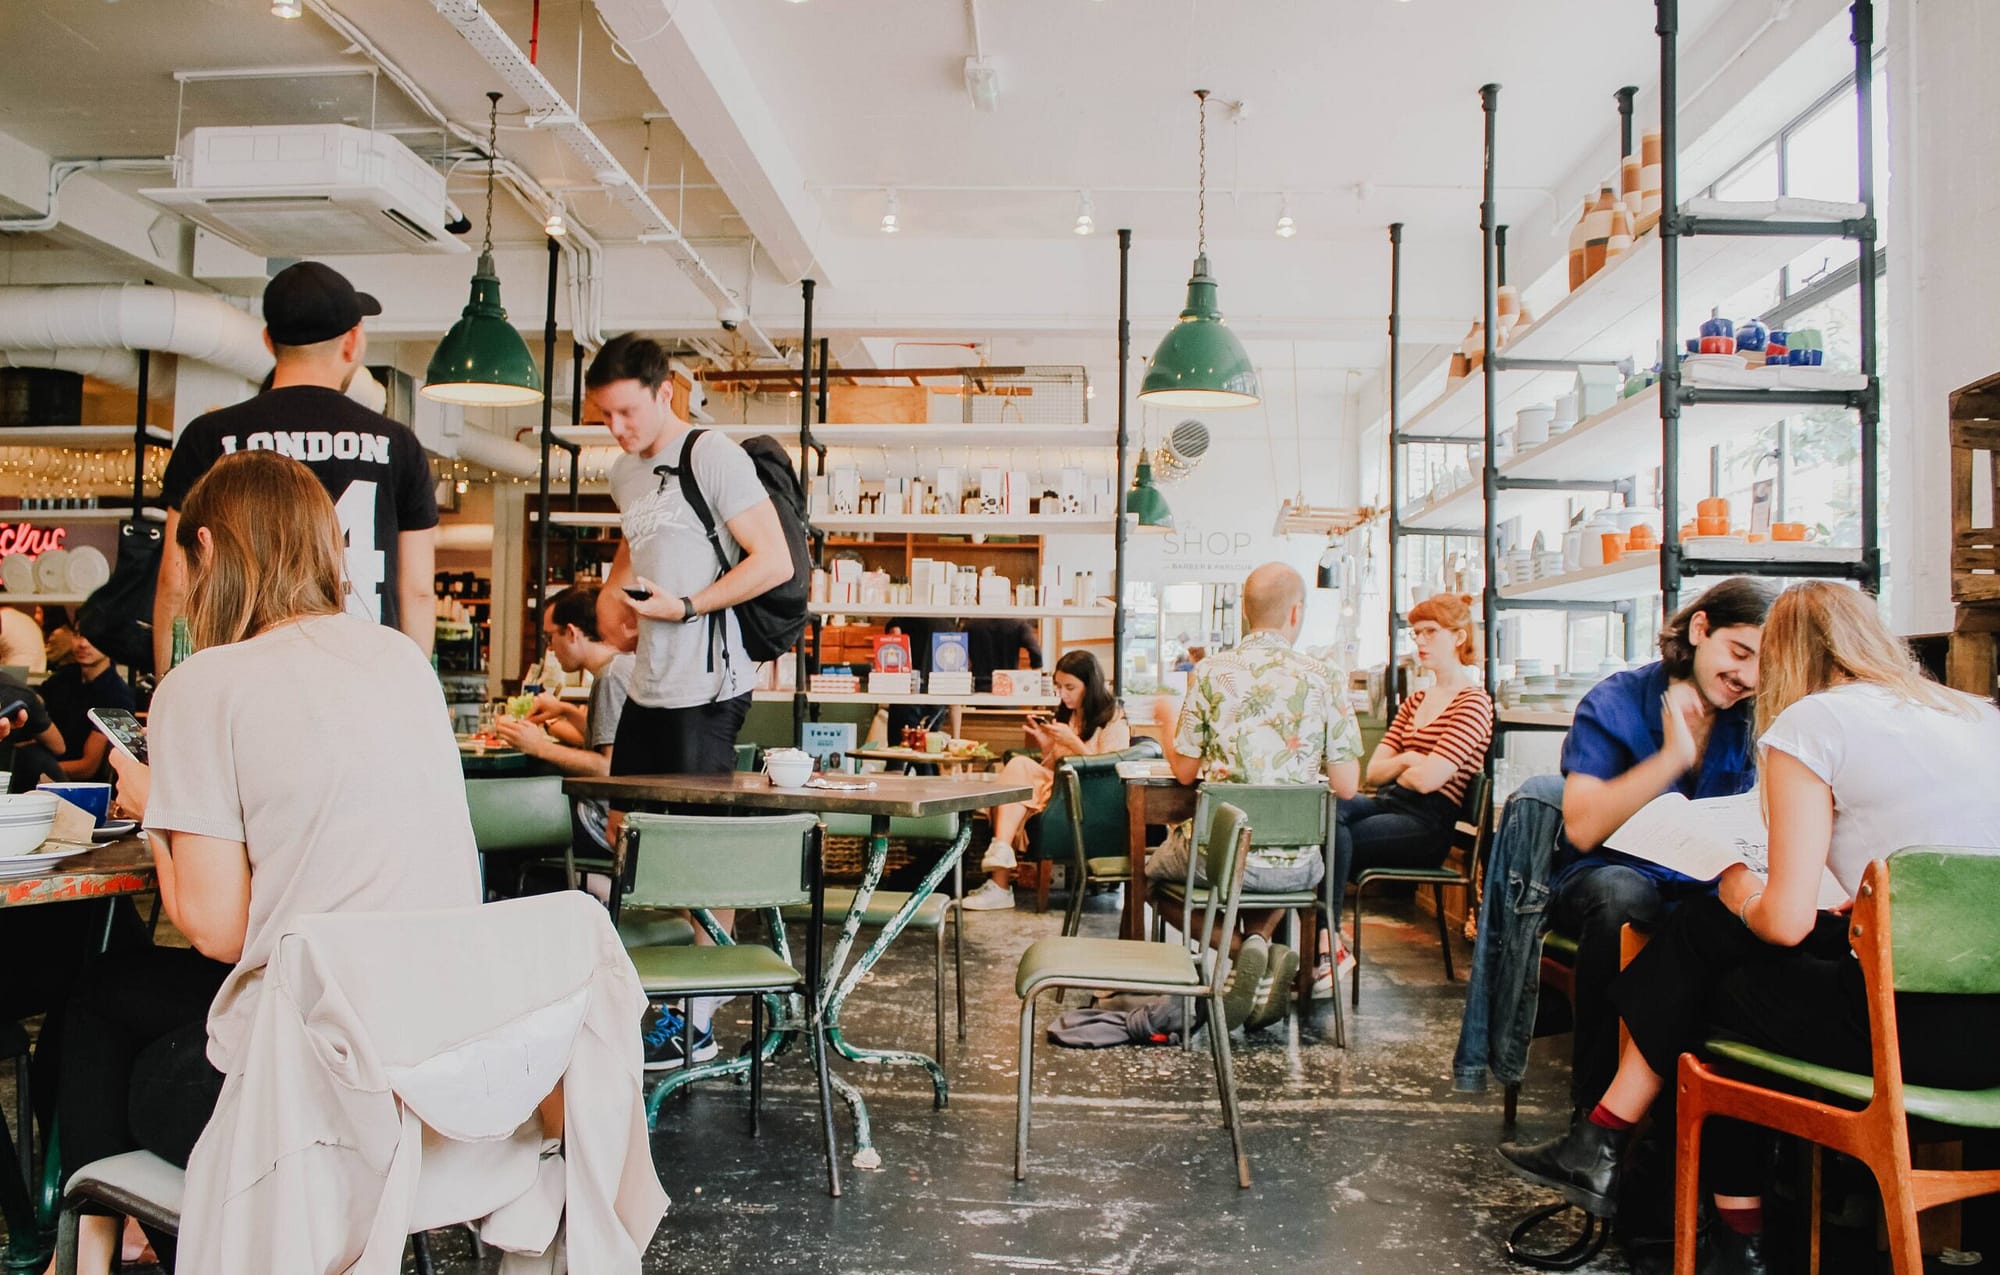 How to Choose? Coworking Spaces vs Cafes vs WFH